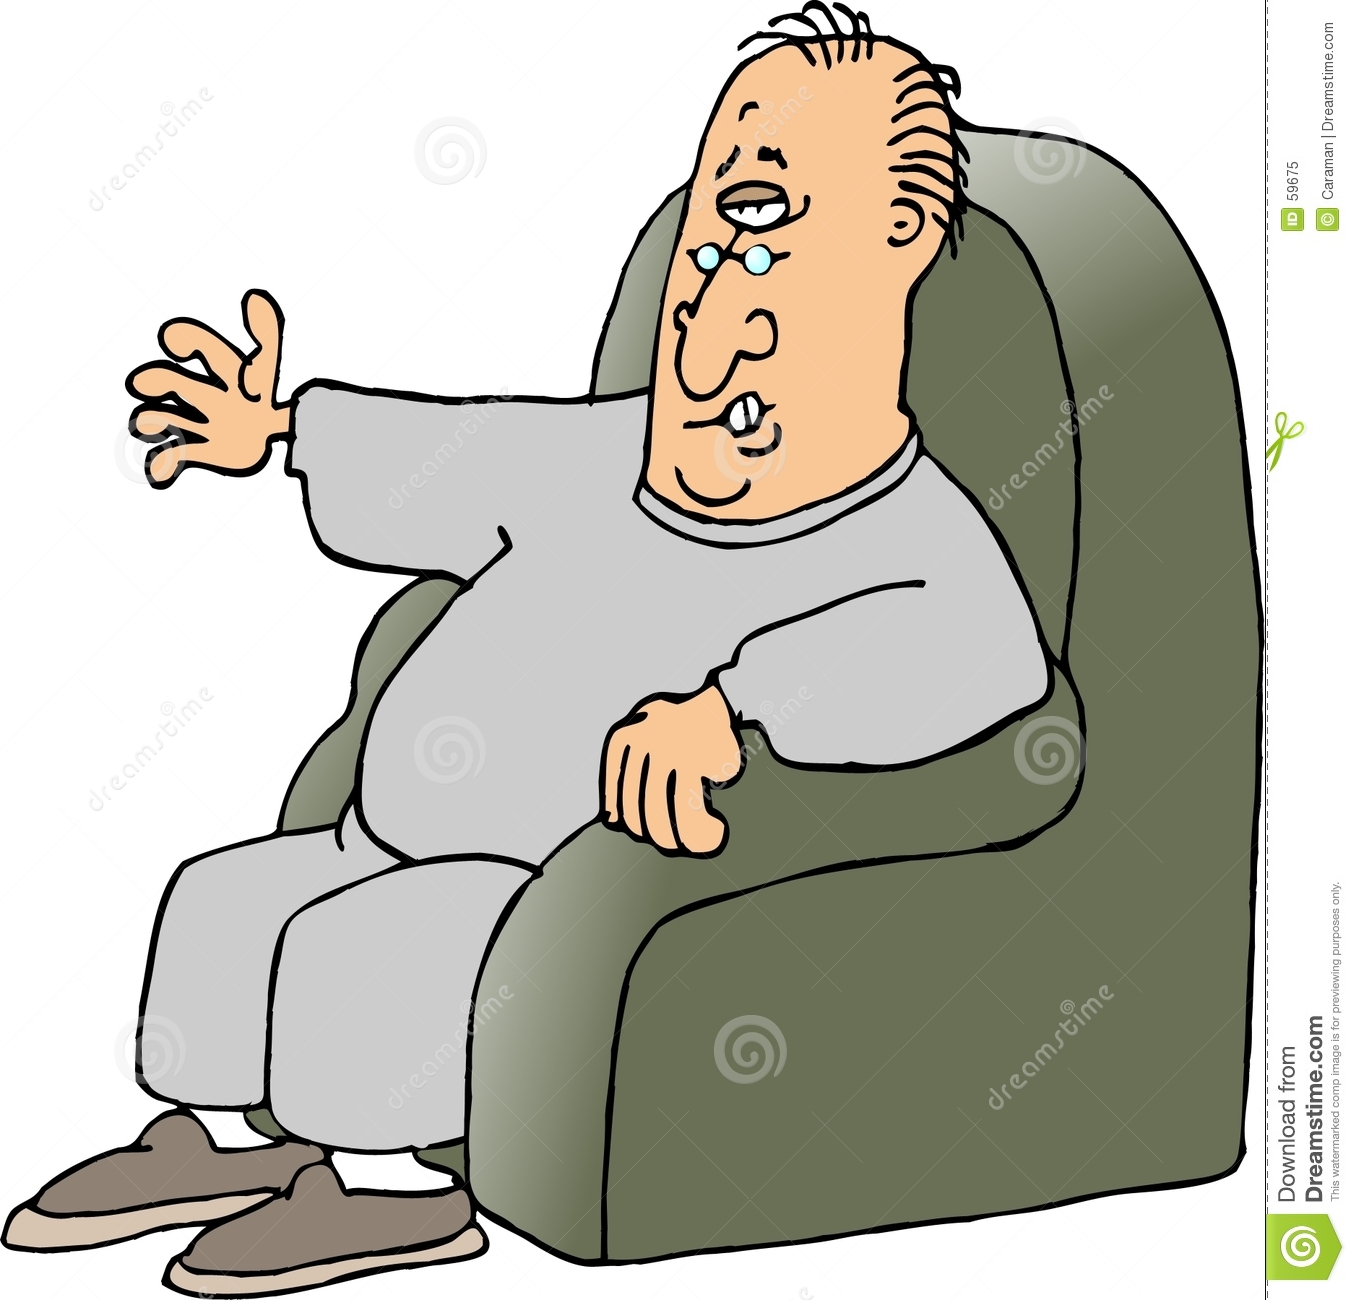 His Illustration That I Created Depicts An Old Man Sitting In A Chair